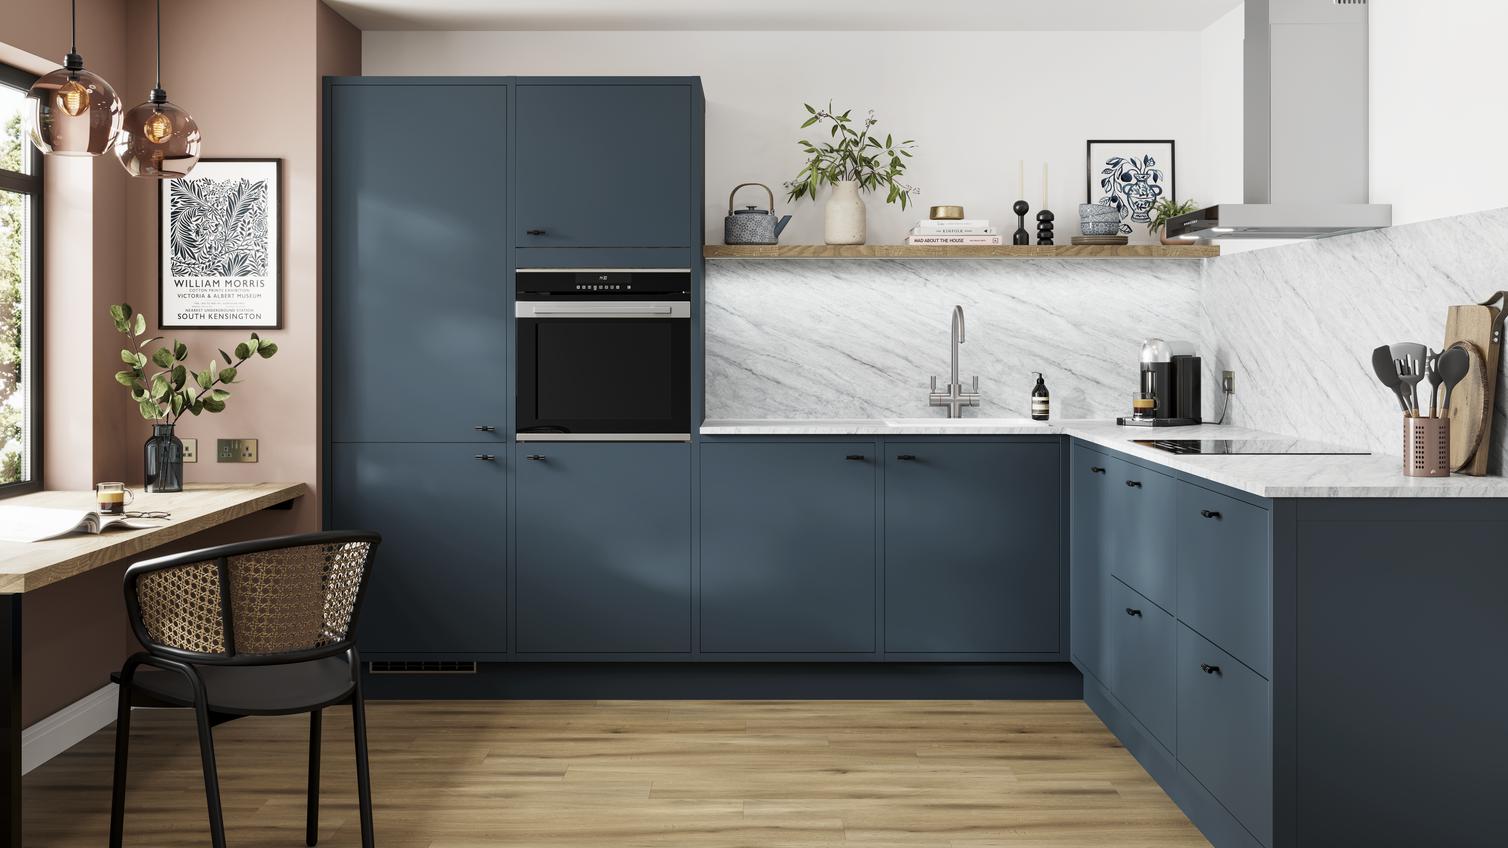 A marine blue In-Frame kitchen idea in an l-shaped layout, with black knob handles, white worktops, and oak laminate floors.